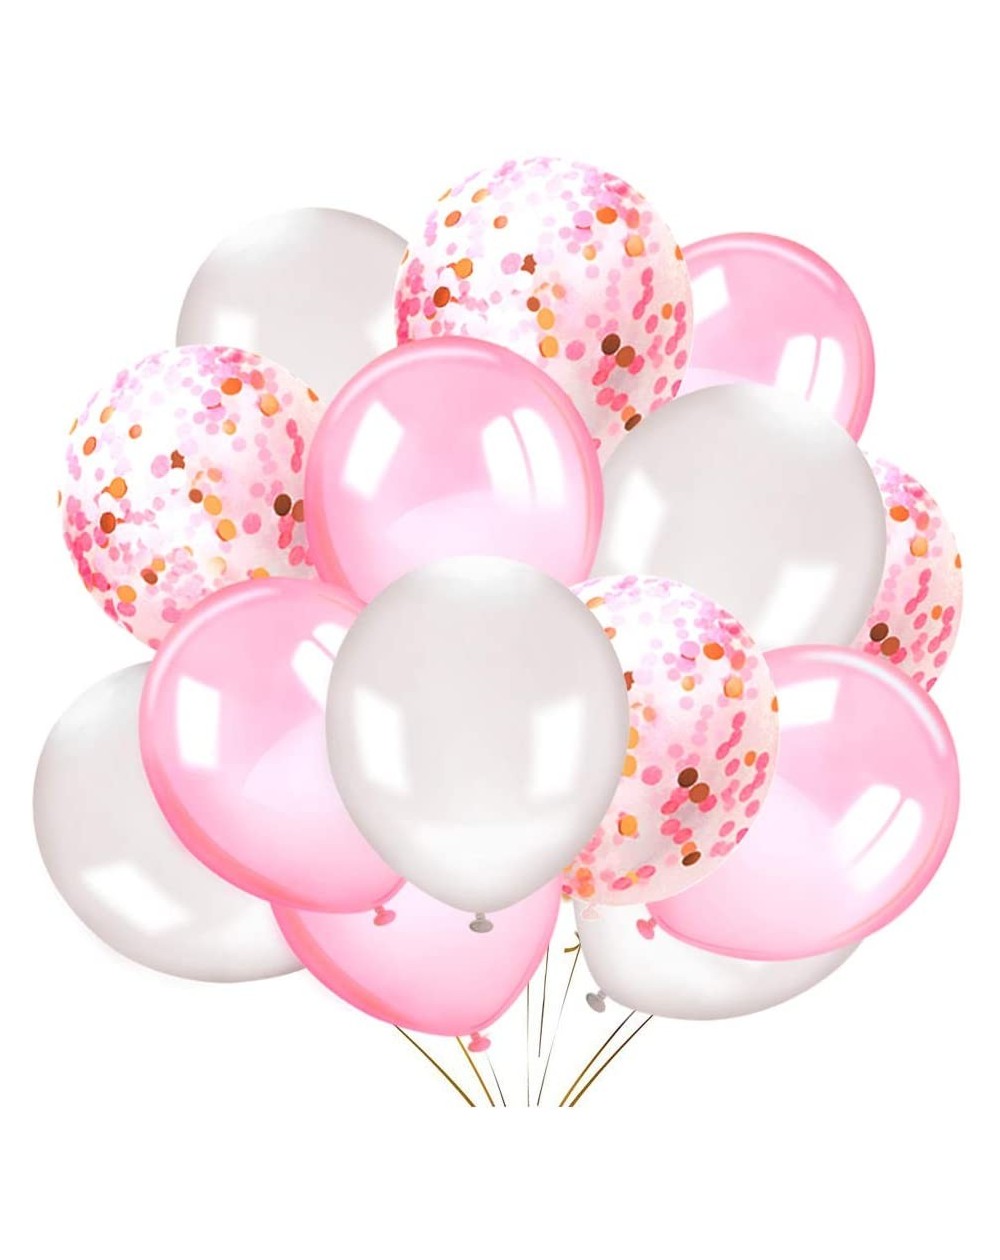 Balloons 50 Pieces 12 Inches Latex Balloons Confetti Balloons Pink and White Balloons Helium Balloons Party Supplies for Wedd...